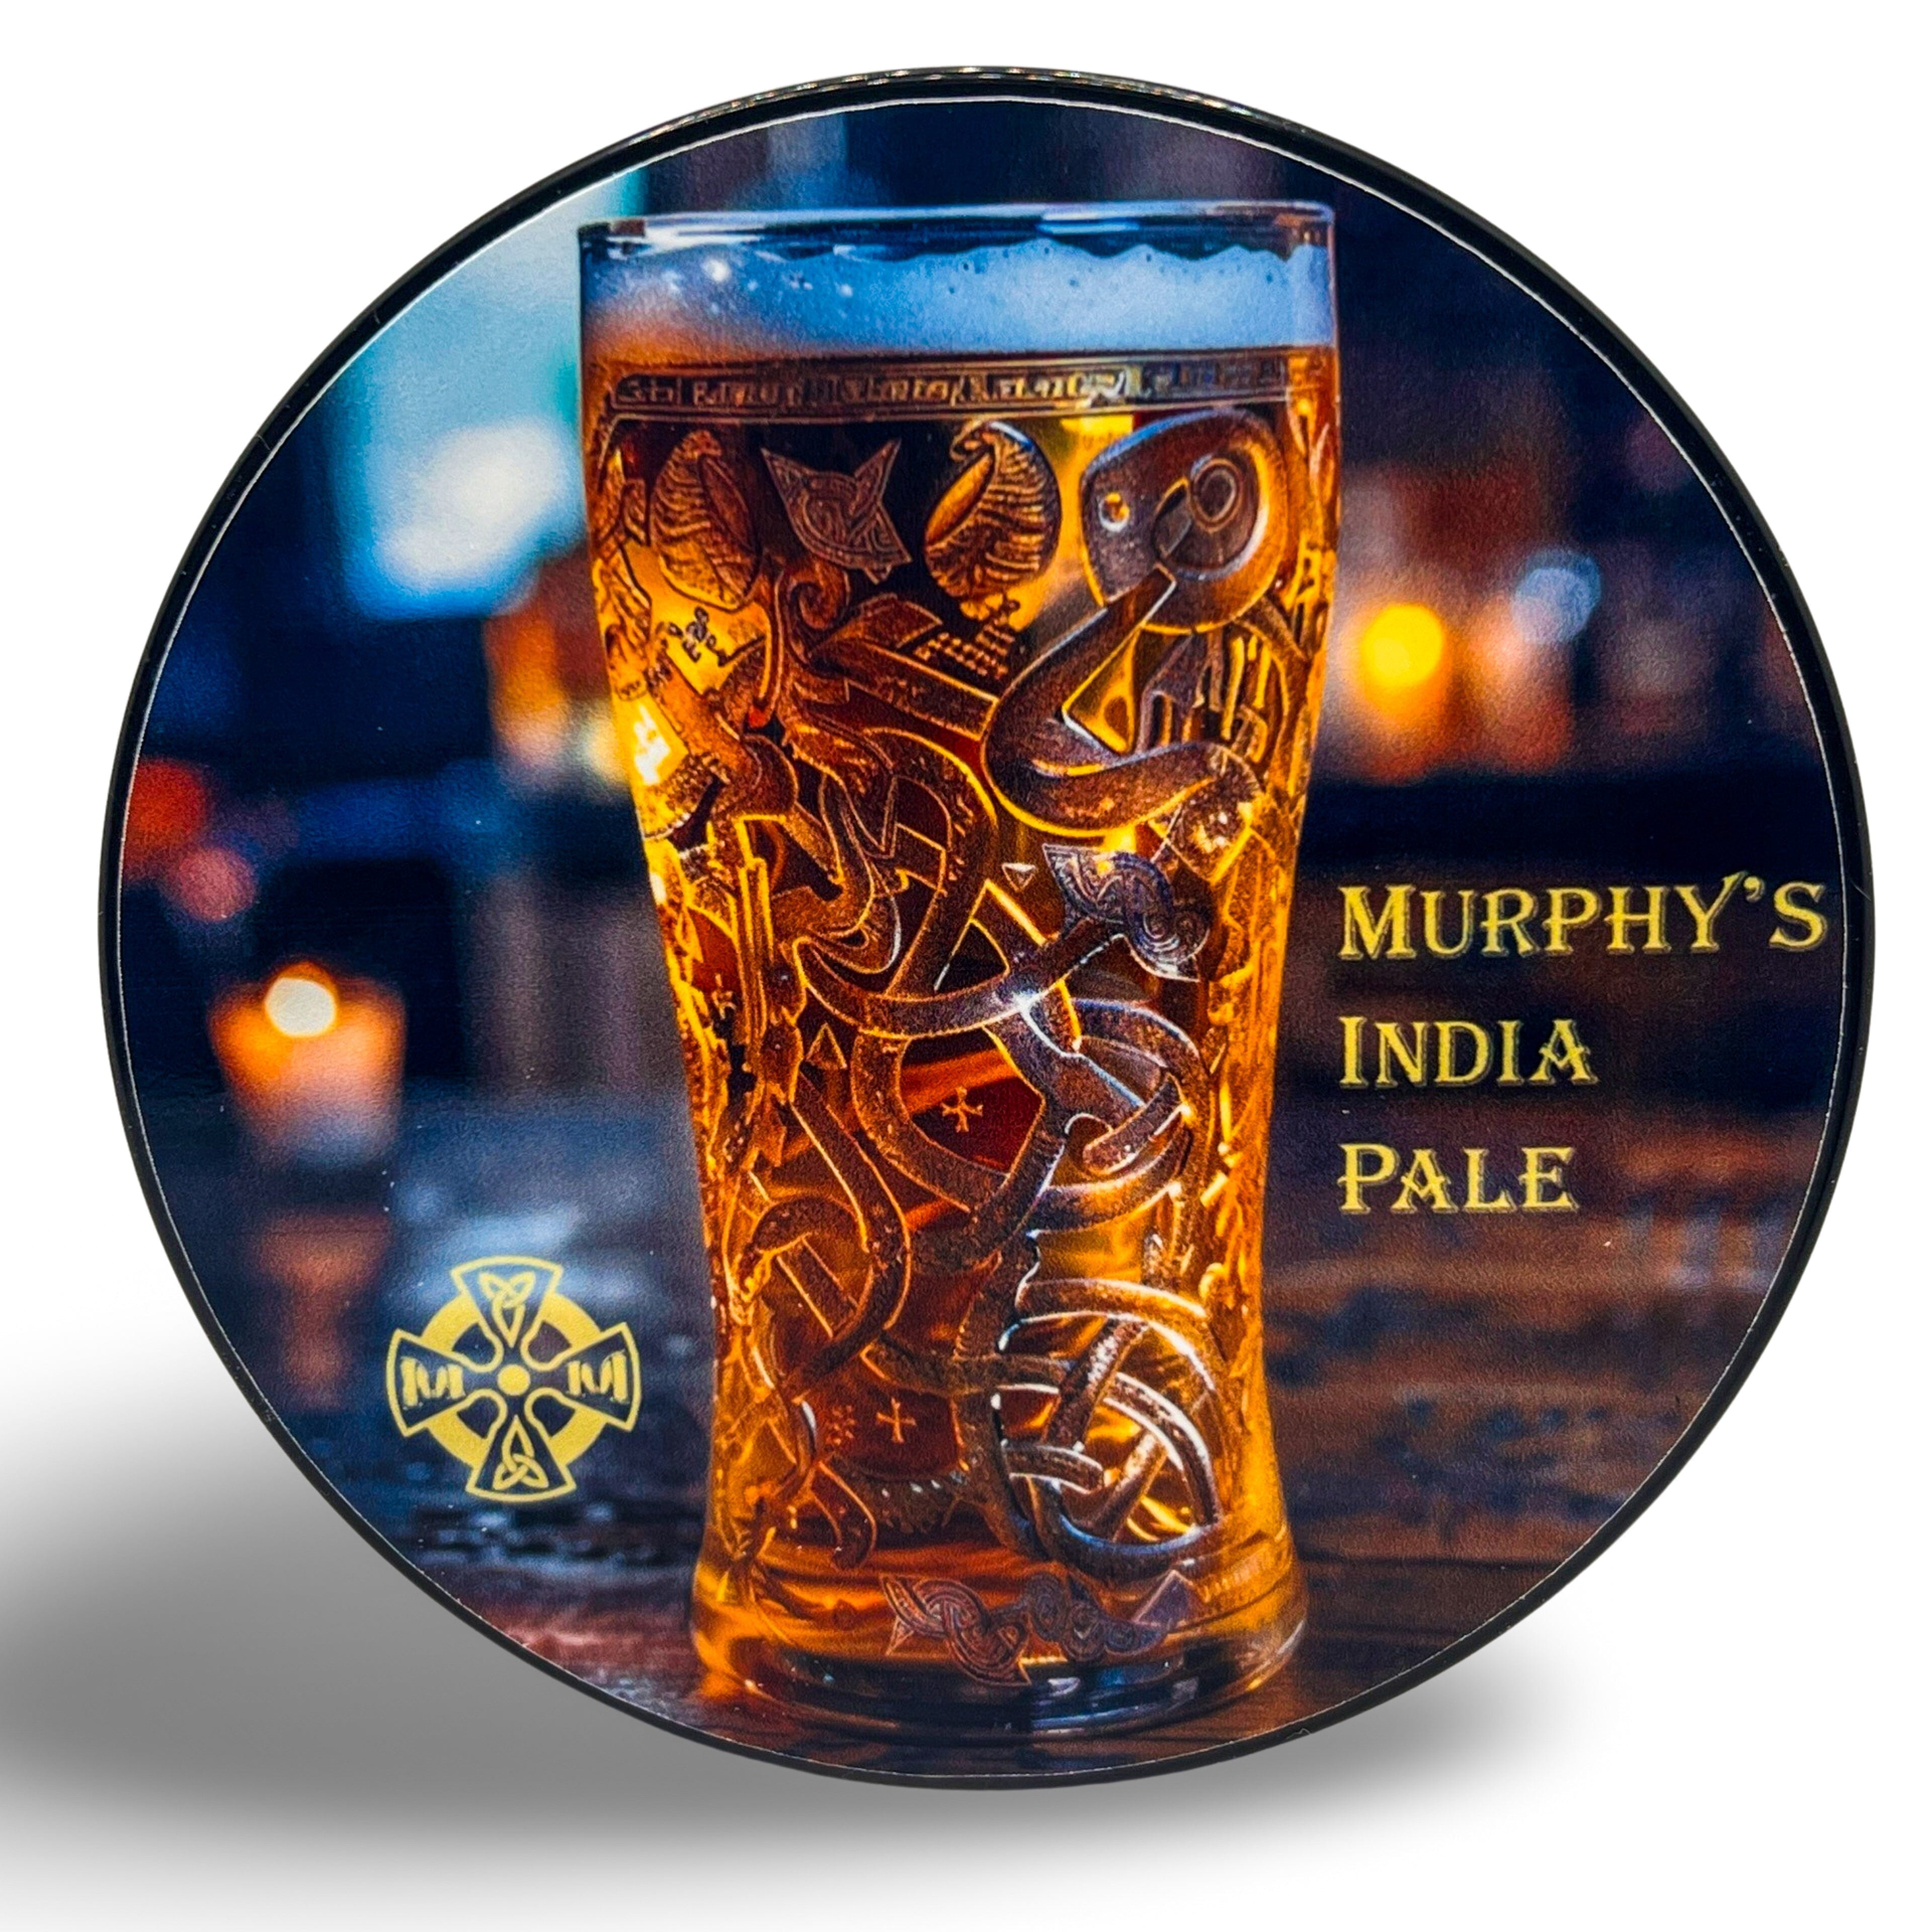 Murphy's India Pale Collection